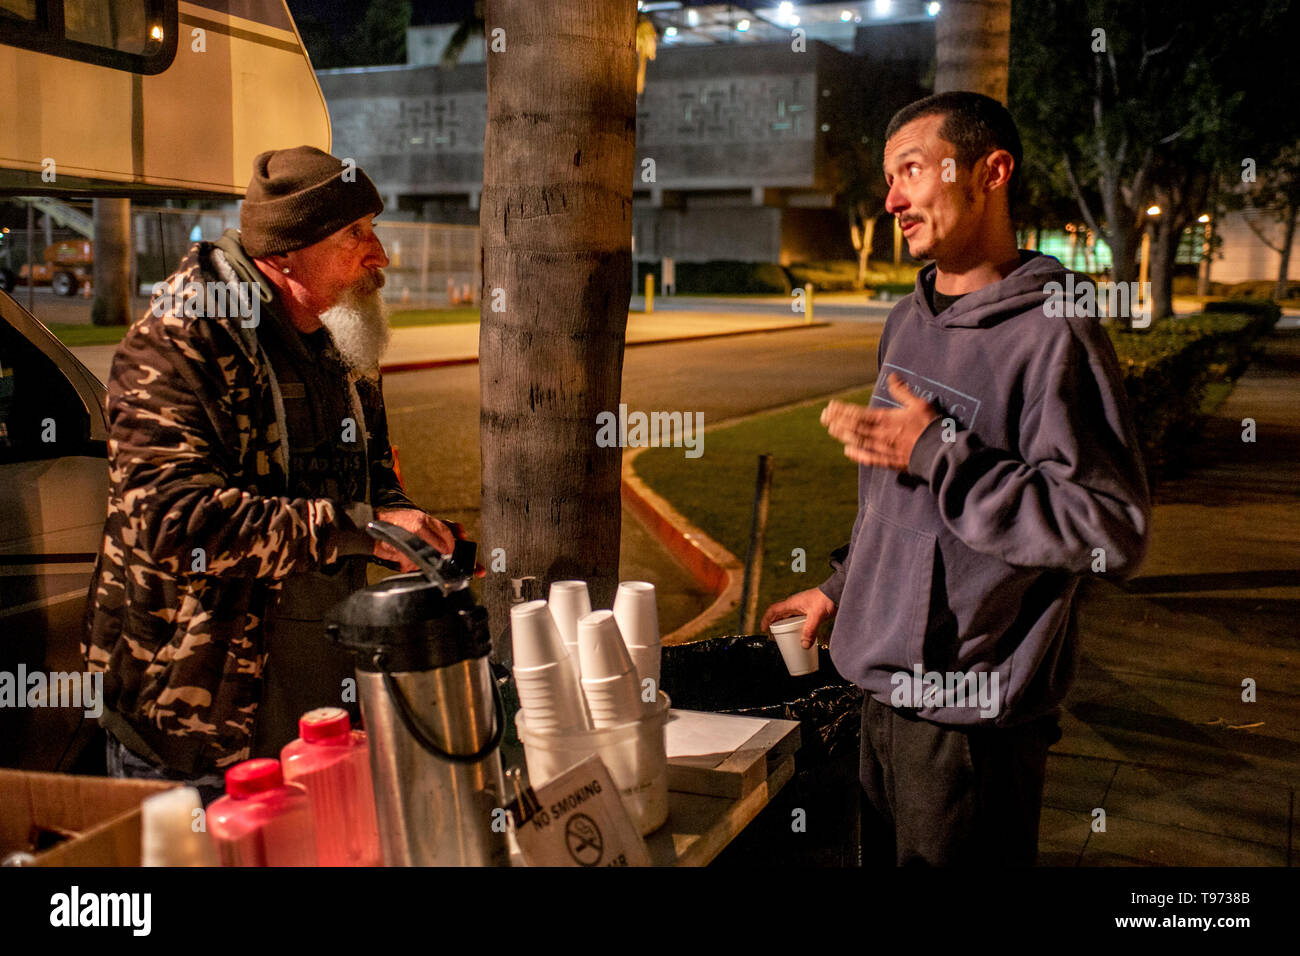 A bearded volunteer helps a released prisoner with food and support from a van parked outside a county jail at night in Santa Ana, CA. Stock Photo